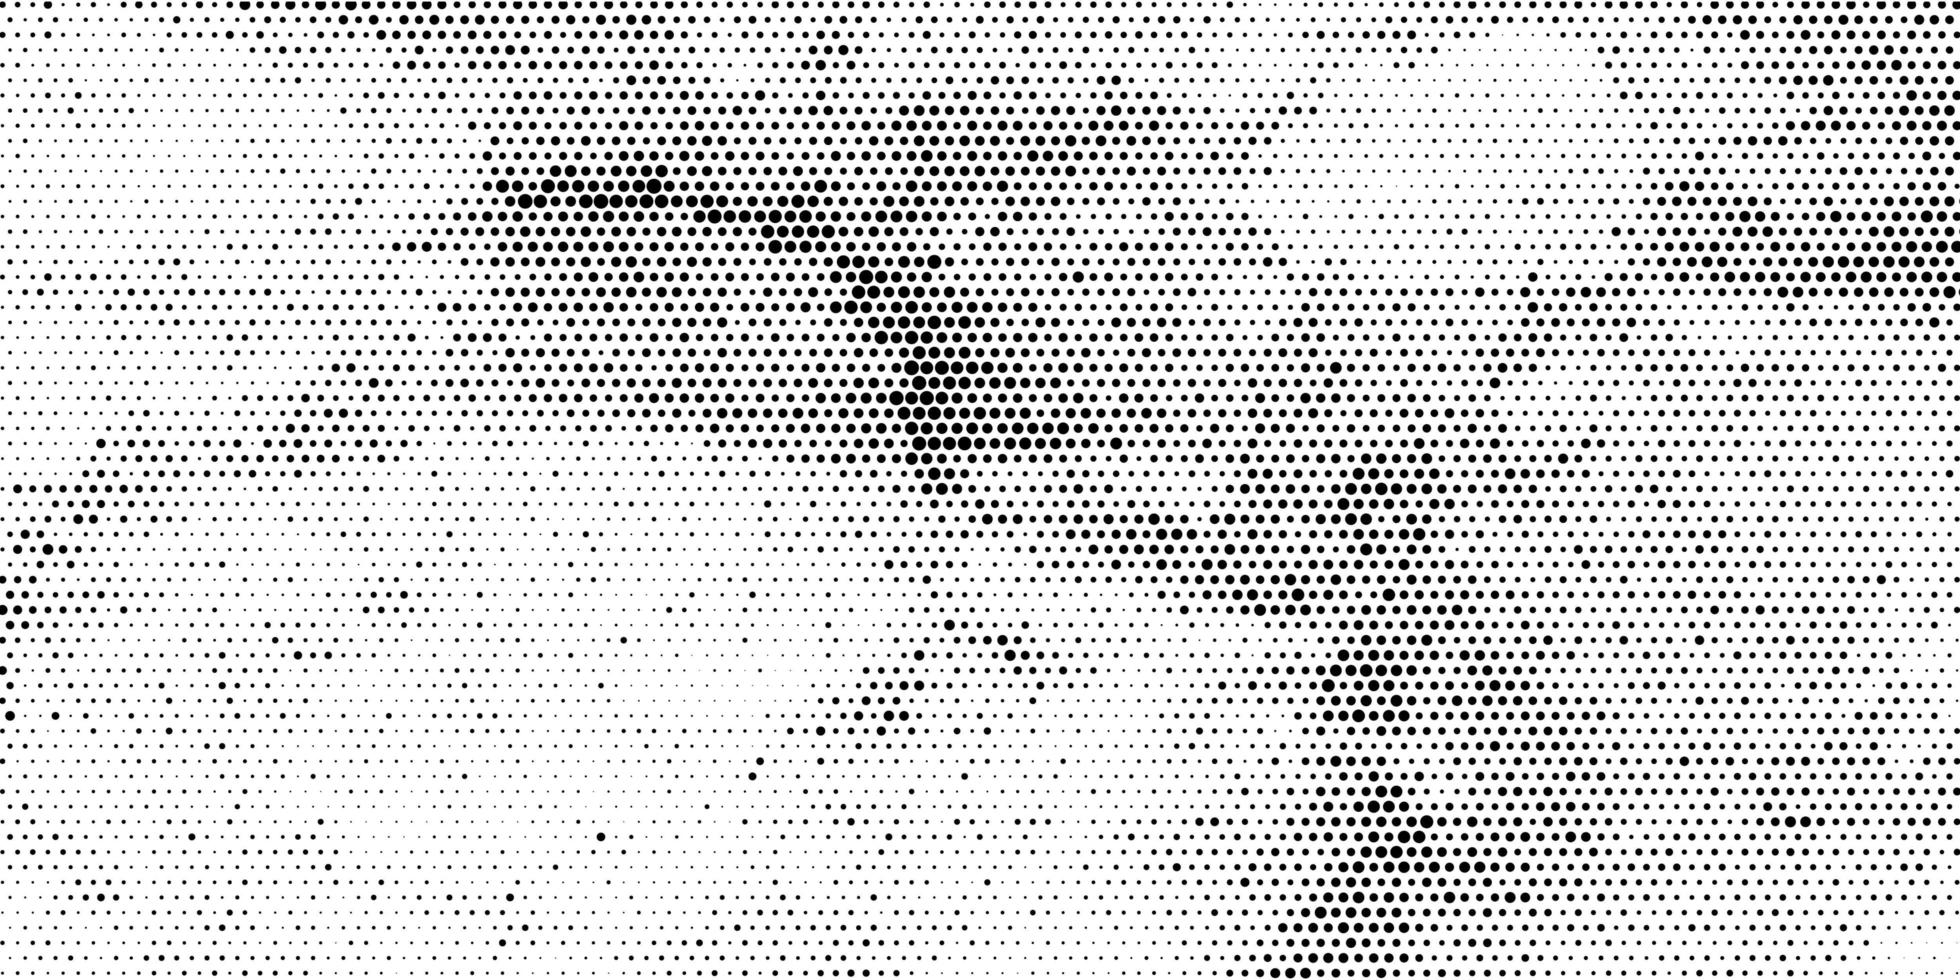 Banner template with abstract halftone dots design vector